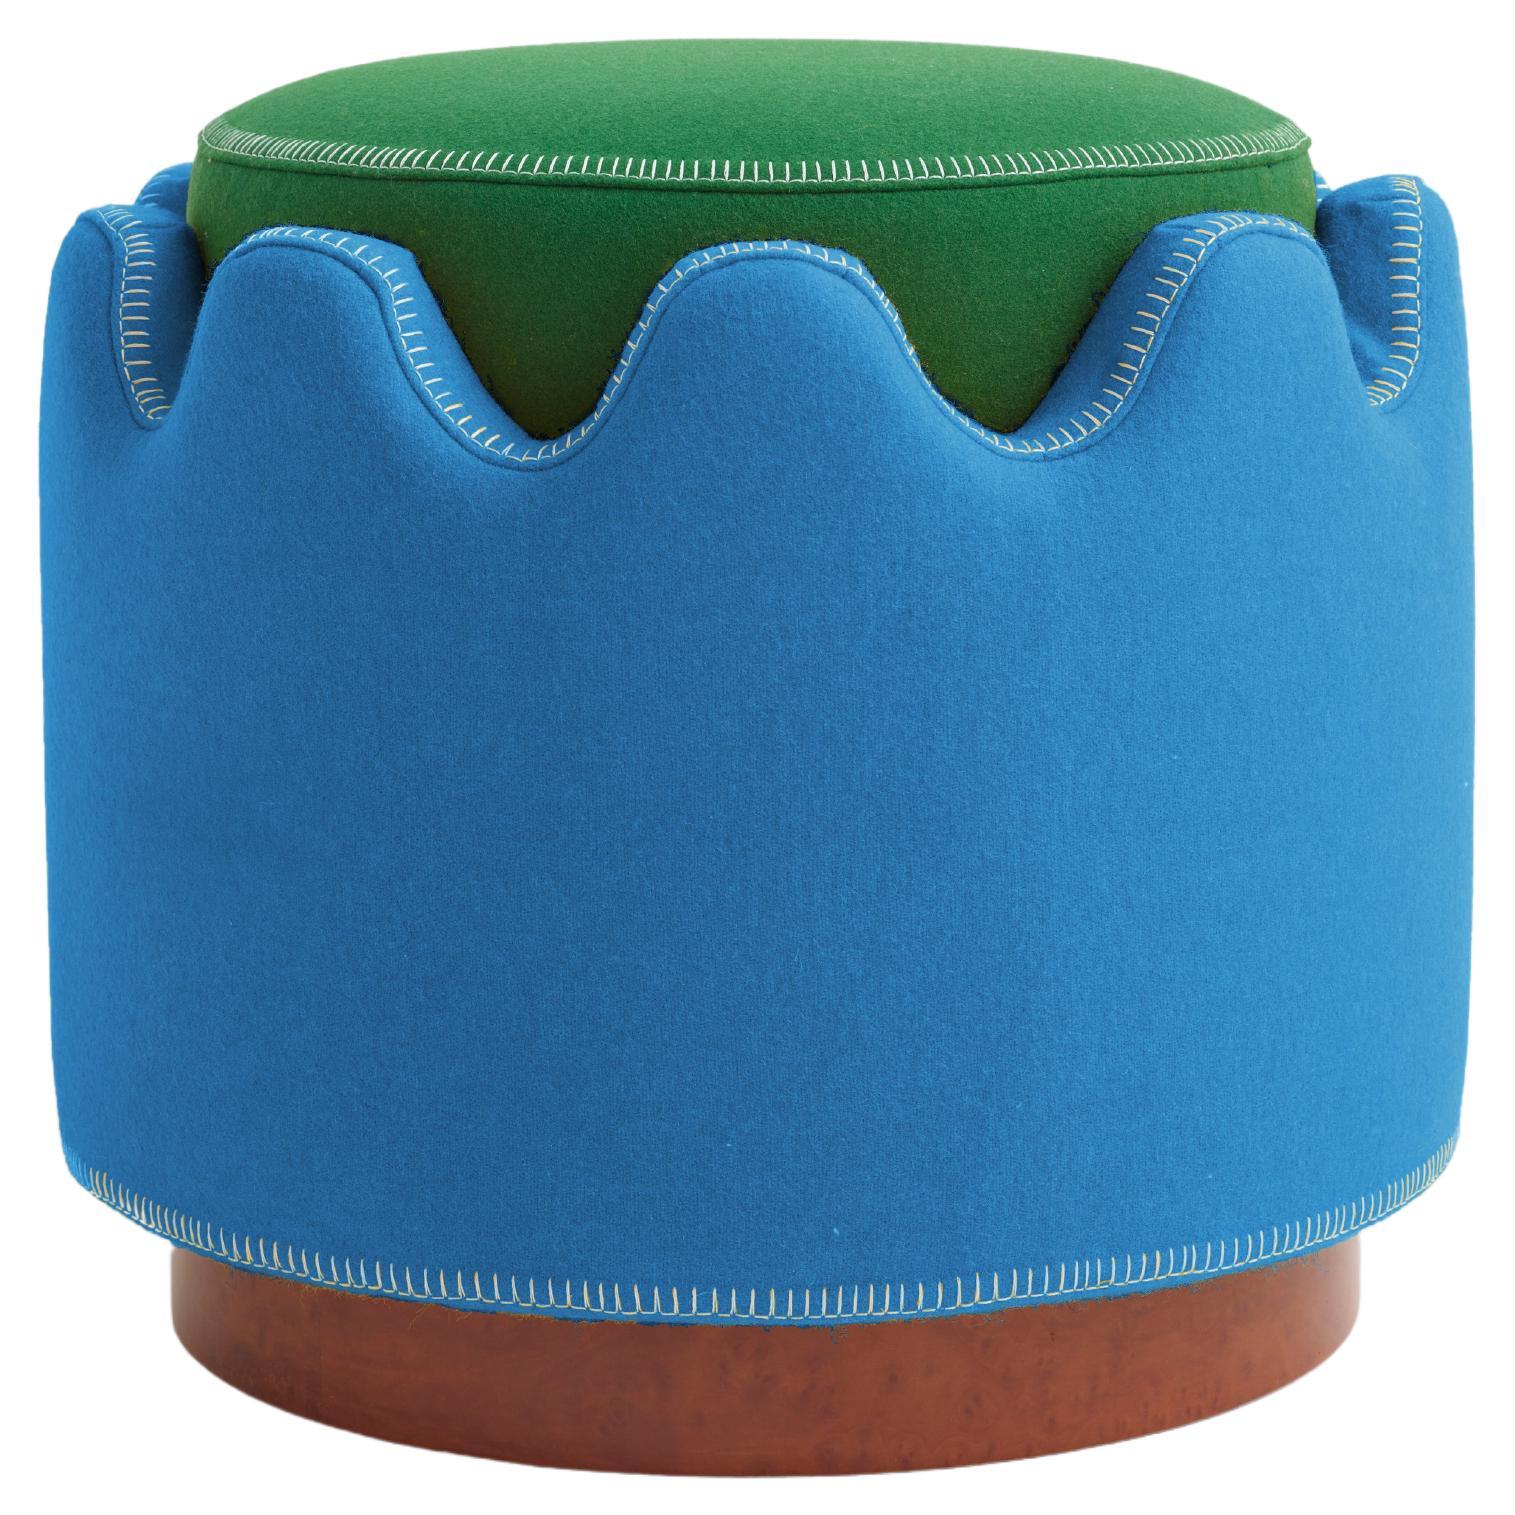 Semo Stool and Footrest in Blue & Green For Sale